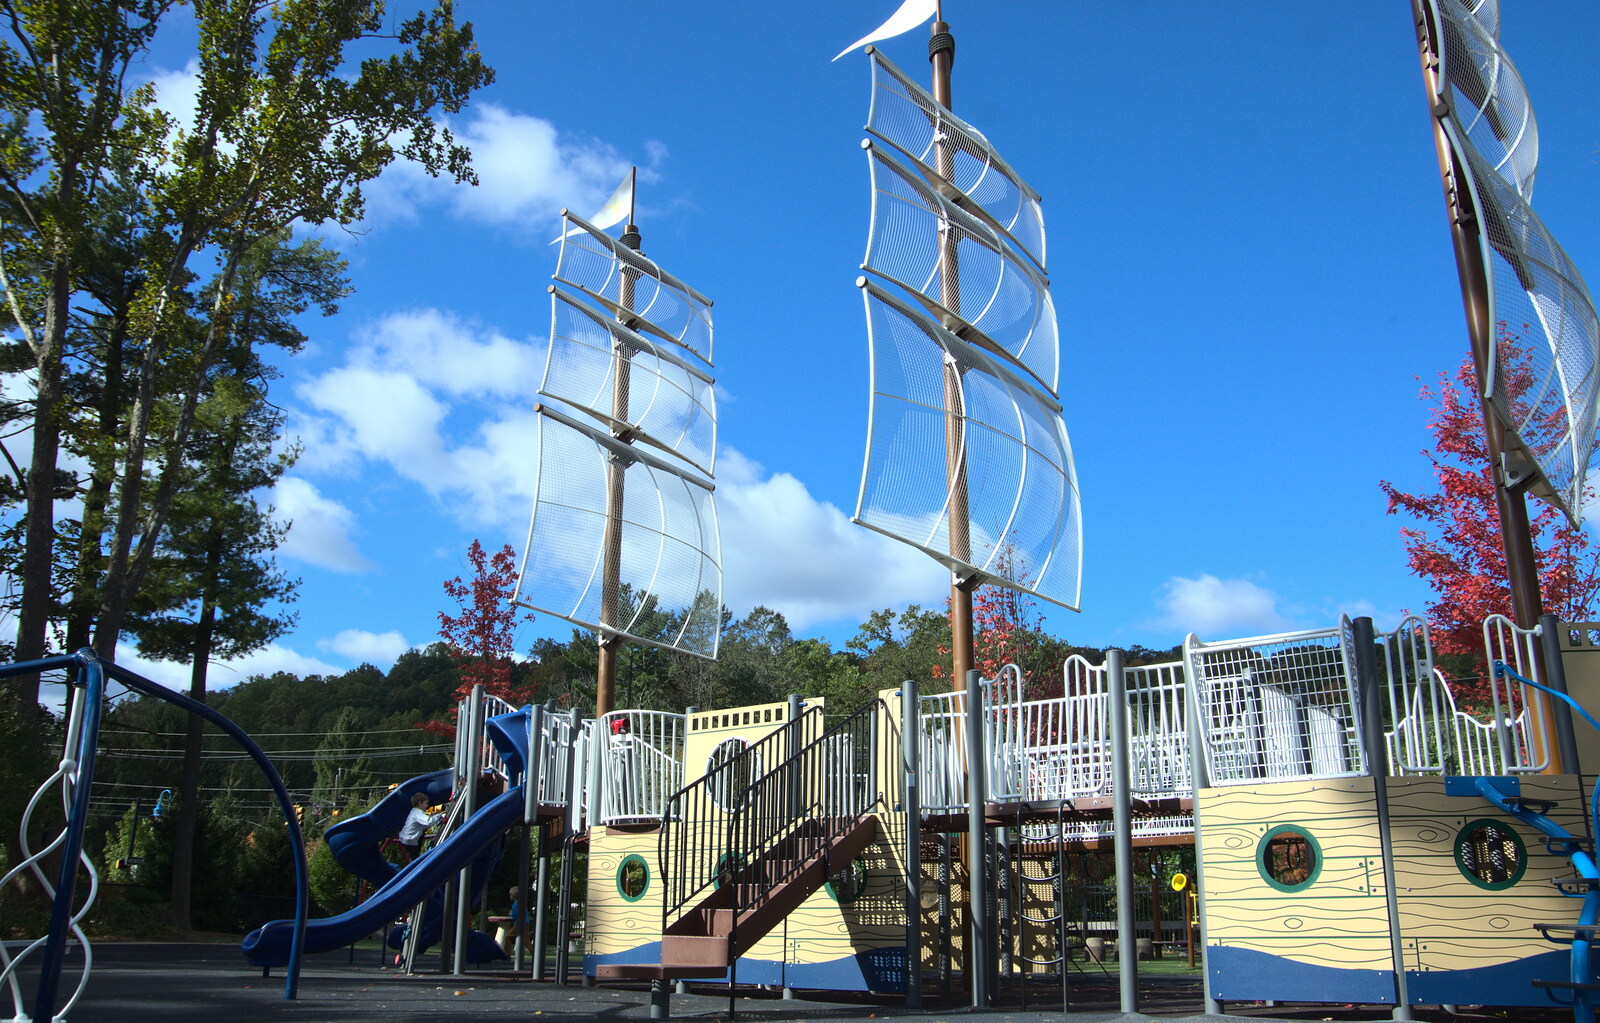 A playground in tall-ship form from Pumpkin Picking at Alstede Farm, Chester, Morris County, New Jersey - 24th October 2018